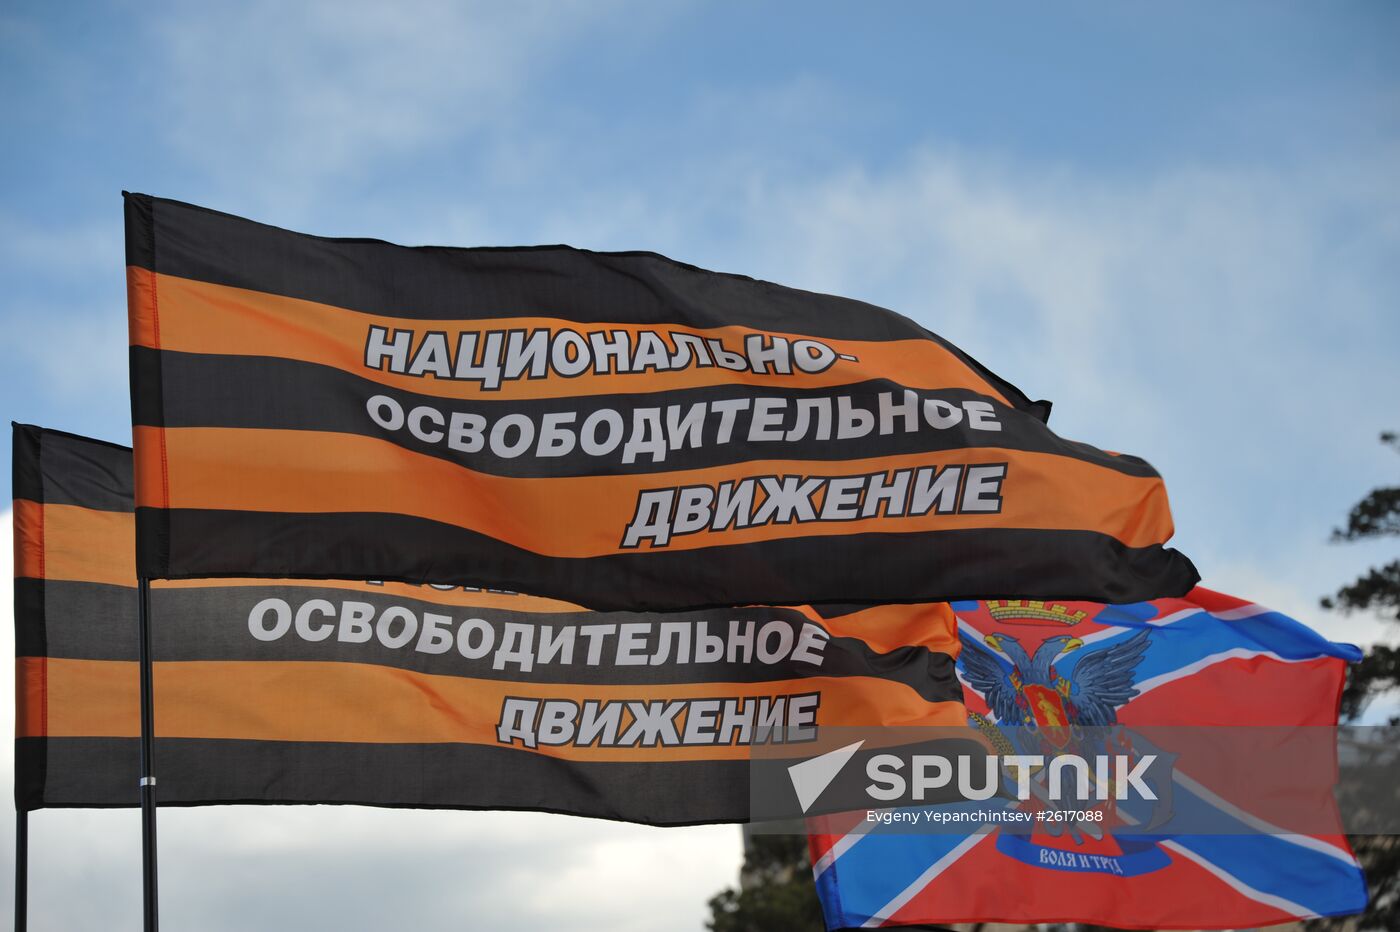 Rallies held across Russia to commemorate those killed in Odessa on May 2, 2014